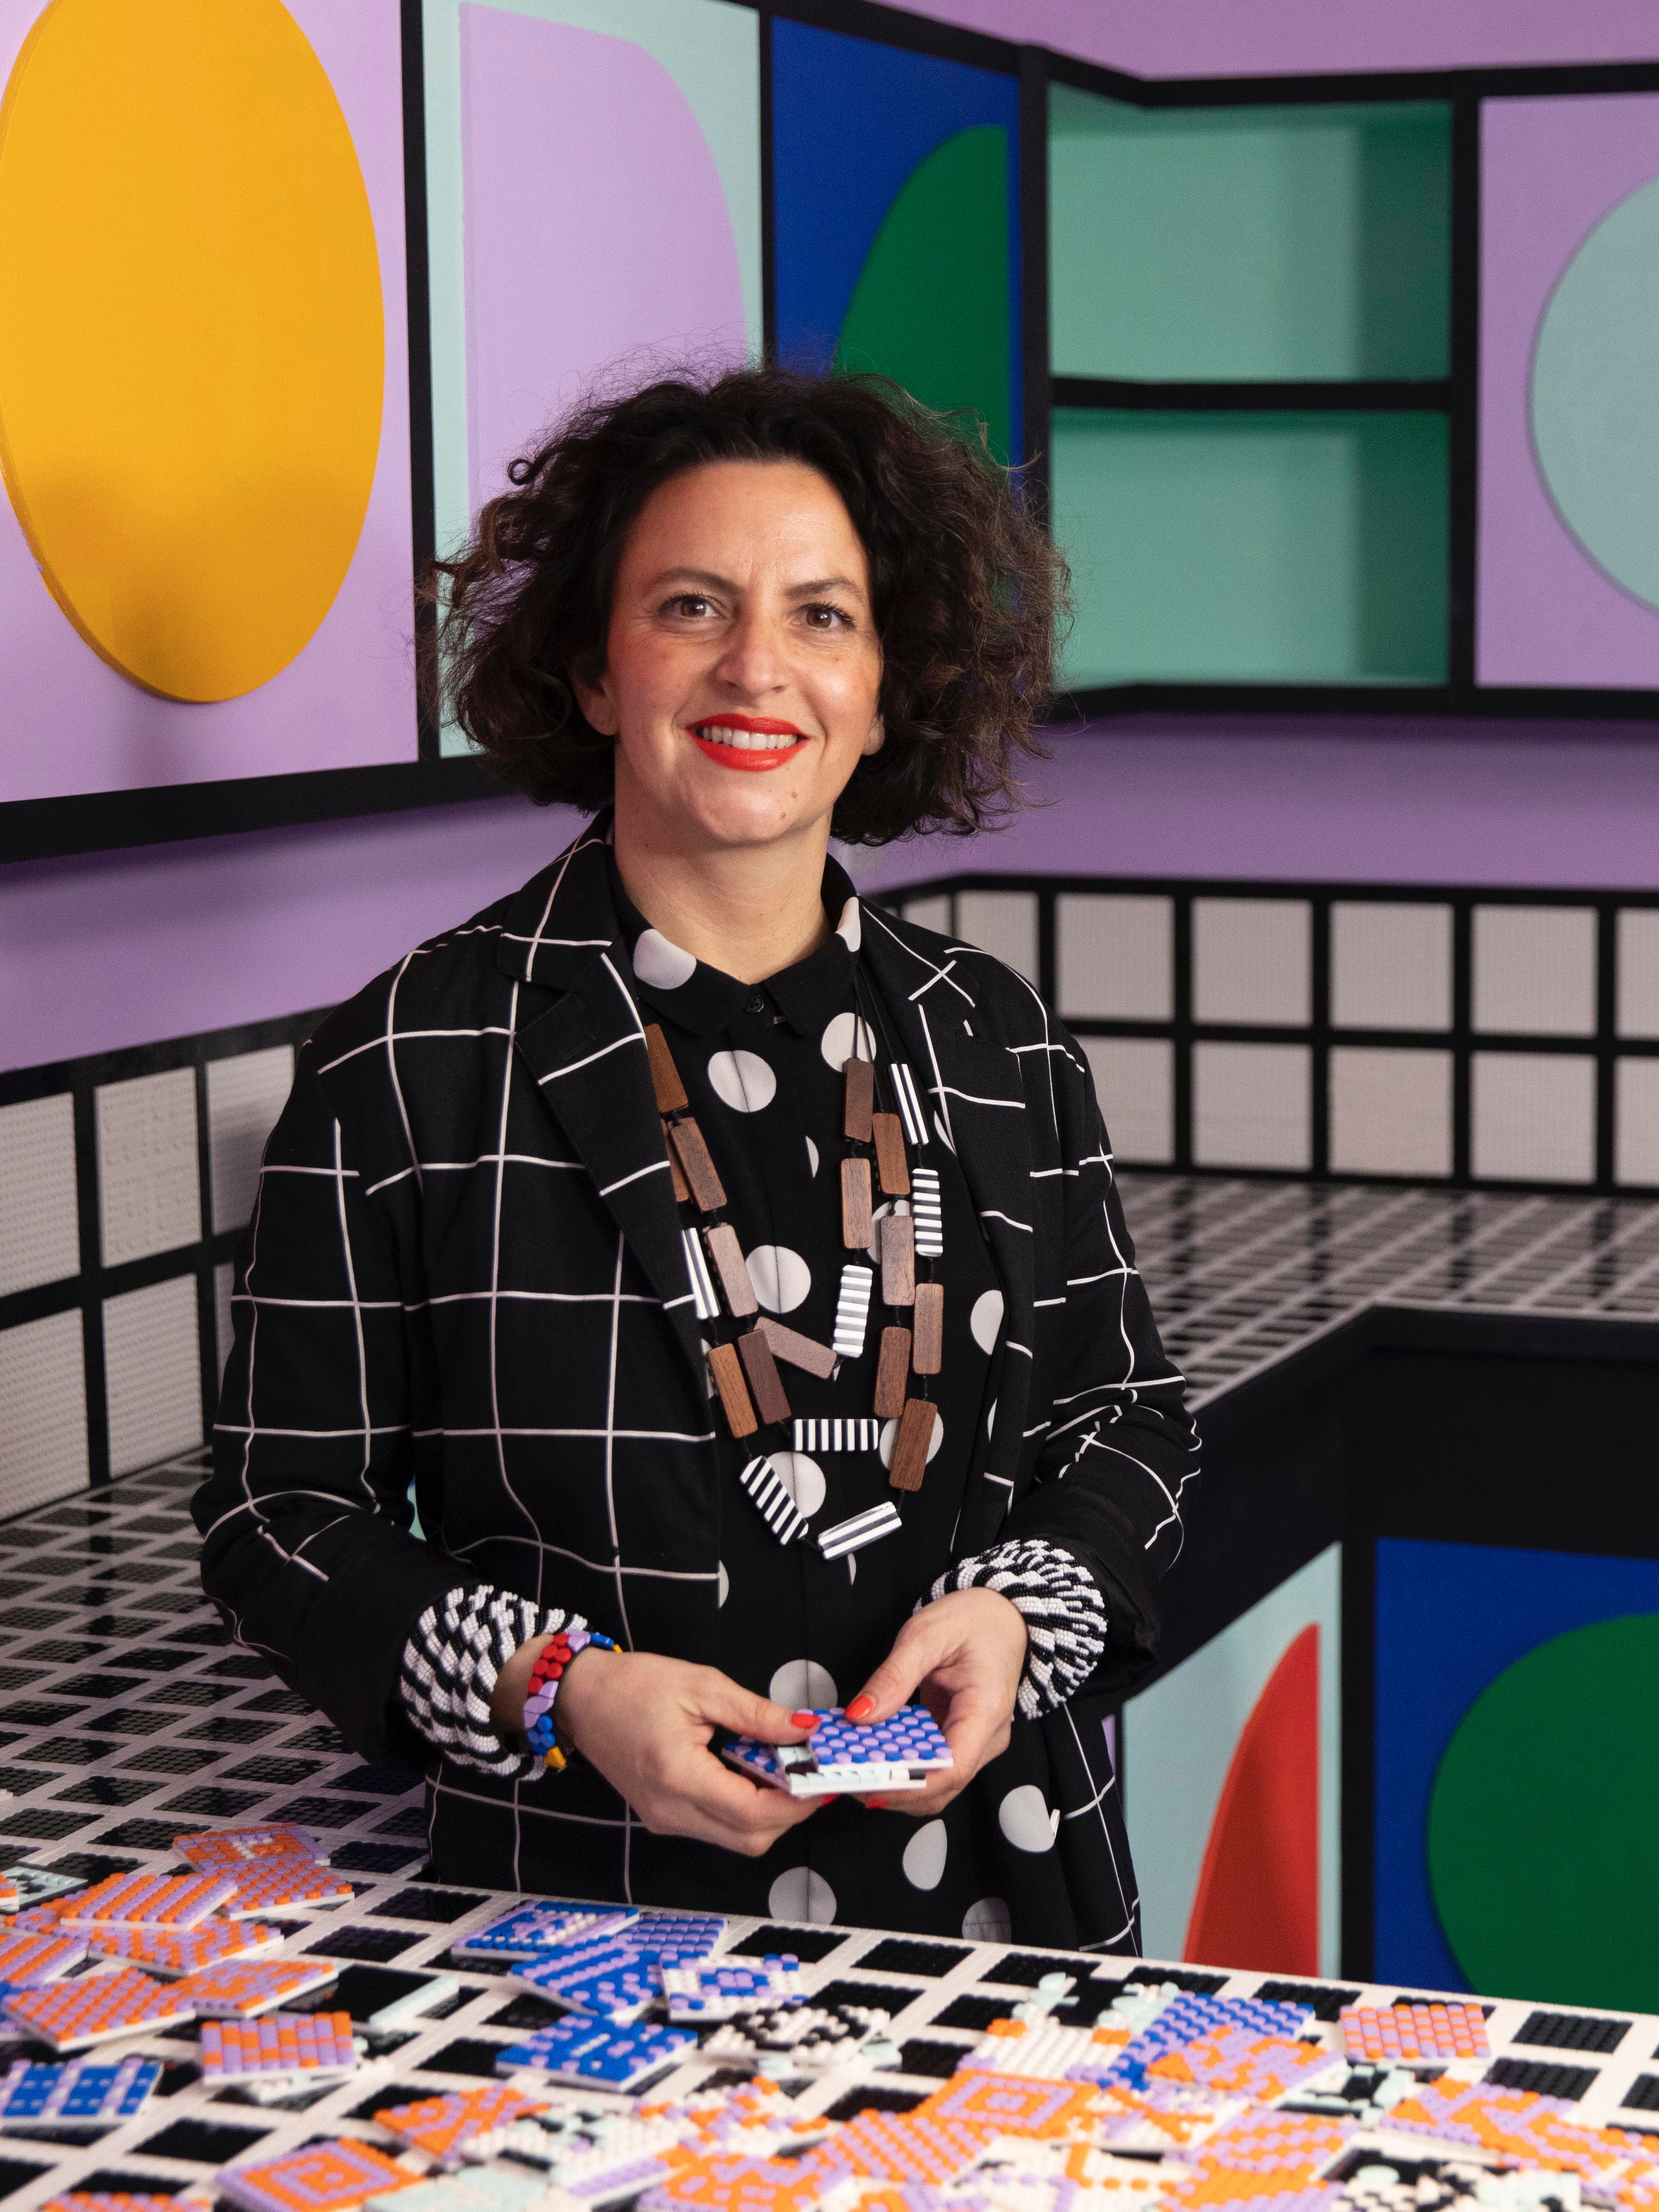 Camille Walala in her Lego kitchen